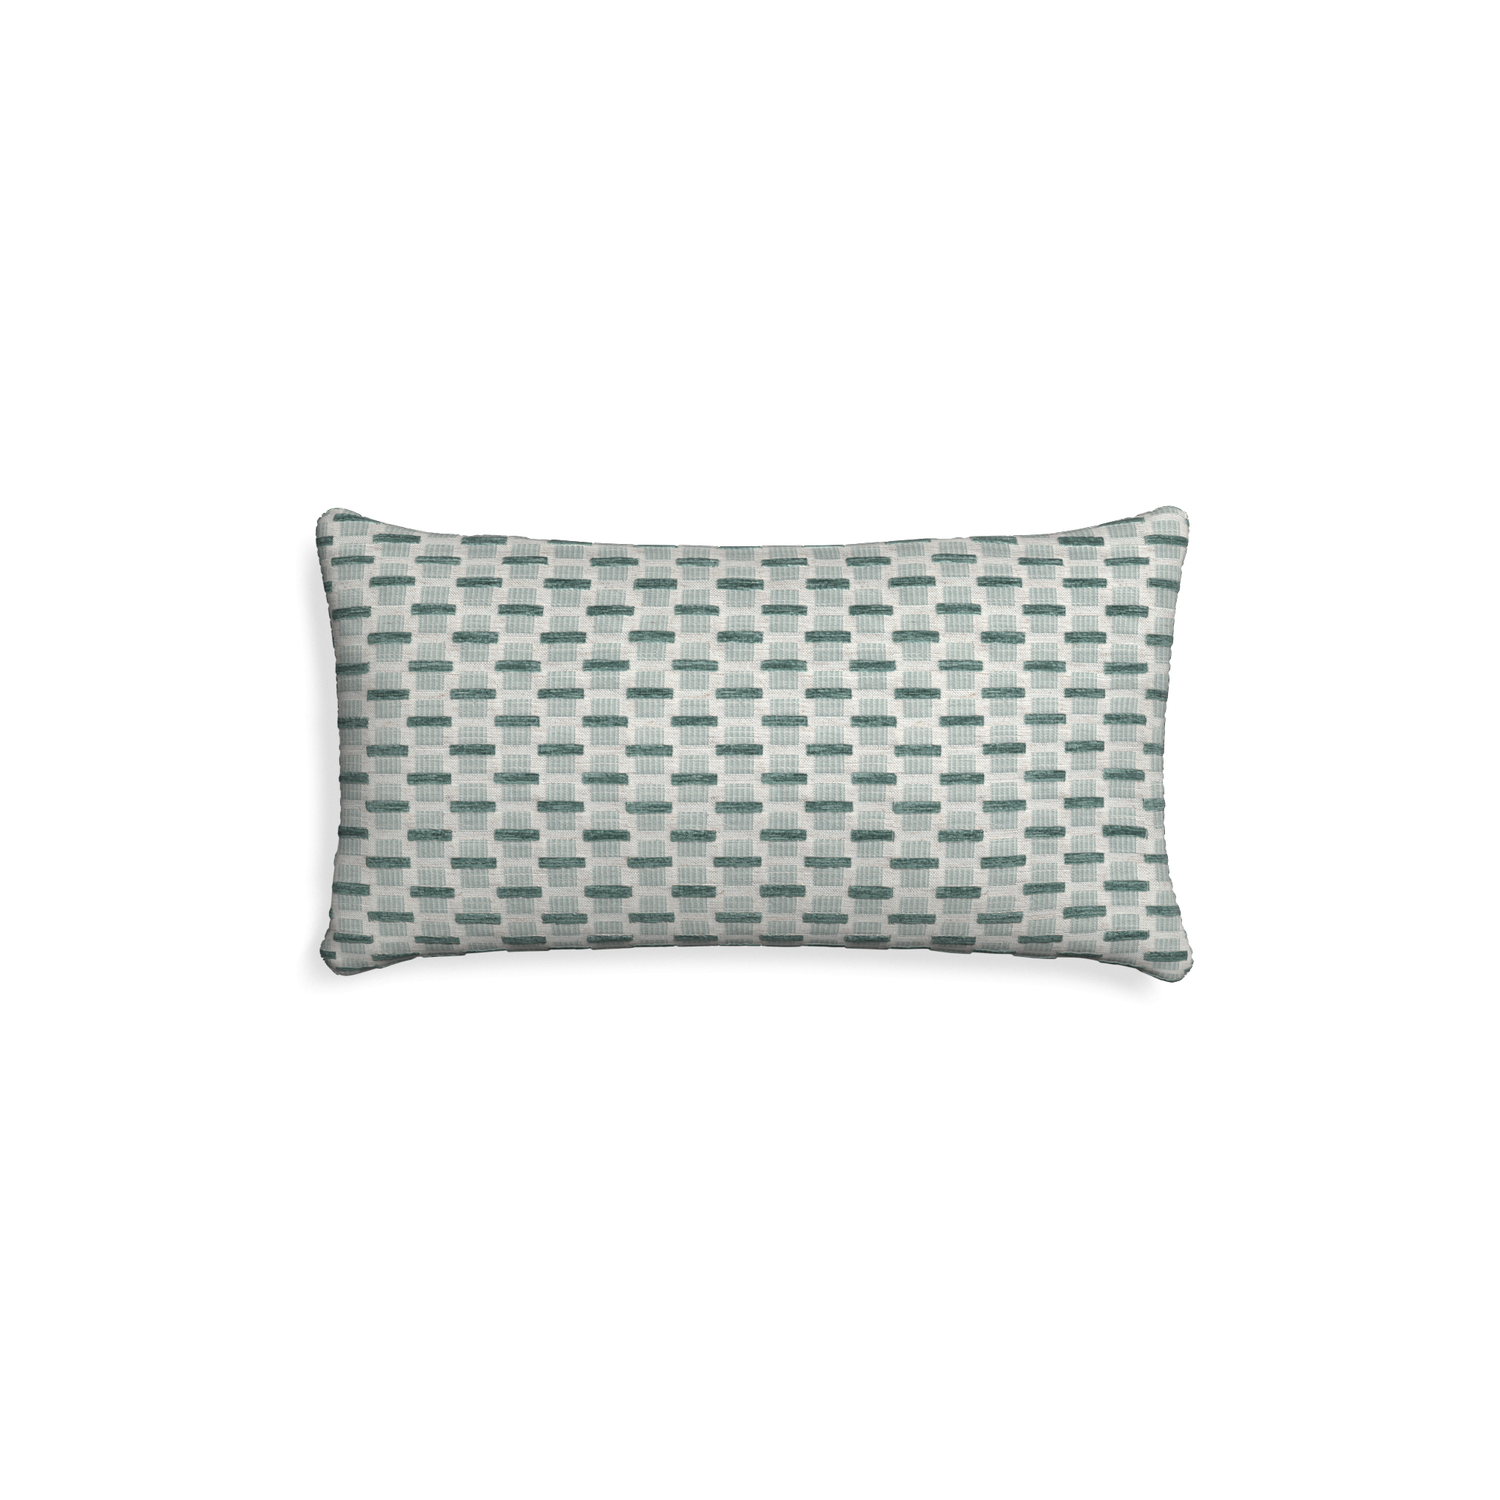 Petite-lumbar willow mint custom green geometric chenillepillow with none on white background